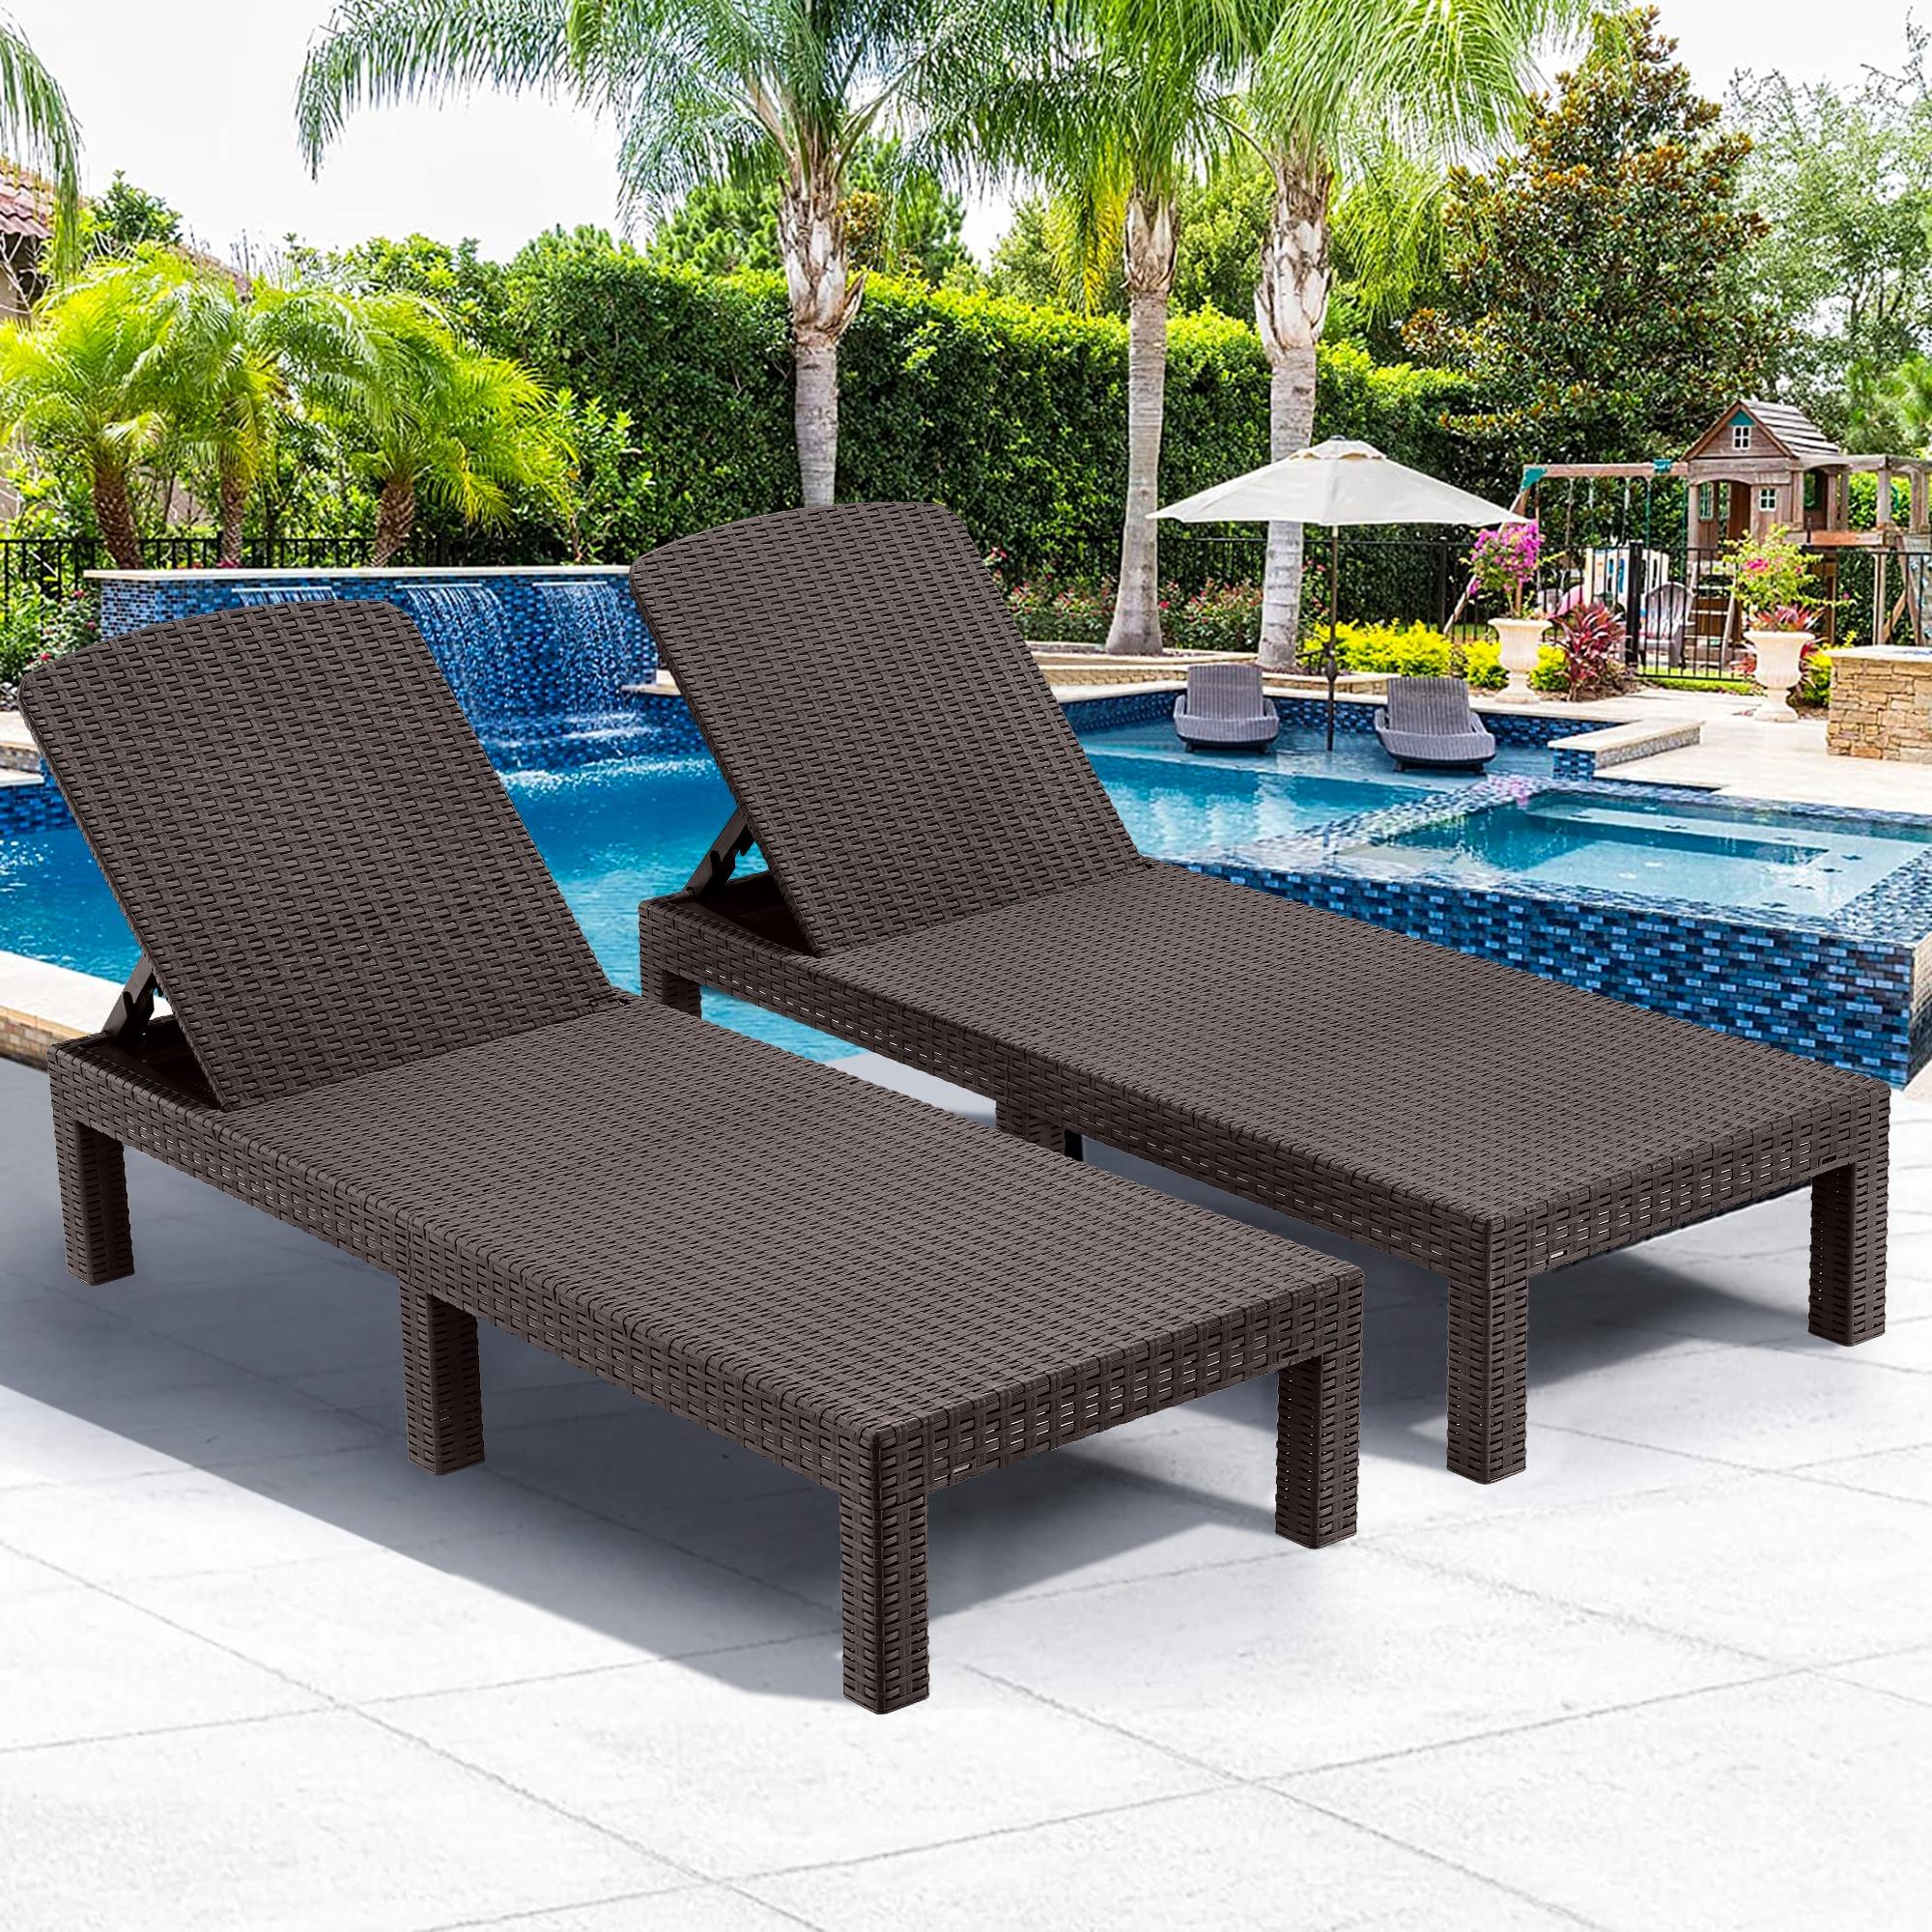 SYNGAR Patio Chaise Lounge Chairs Set of 2, Adjustable Chaise for Outside, PP Resin Reclining Lounge Chairs, Outdoor Sun Loungers for Poolside Deck Garden, Espresso - image 2 of 10